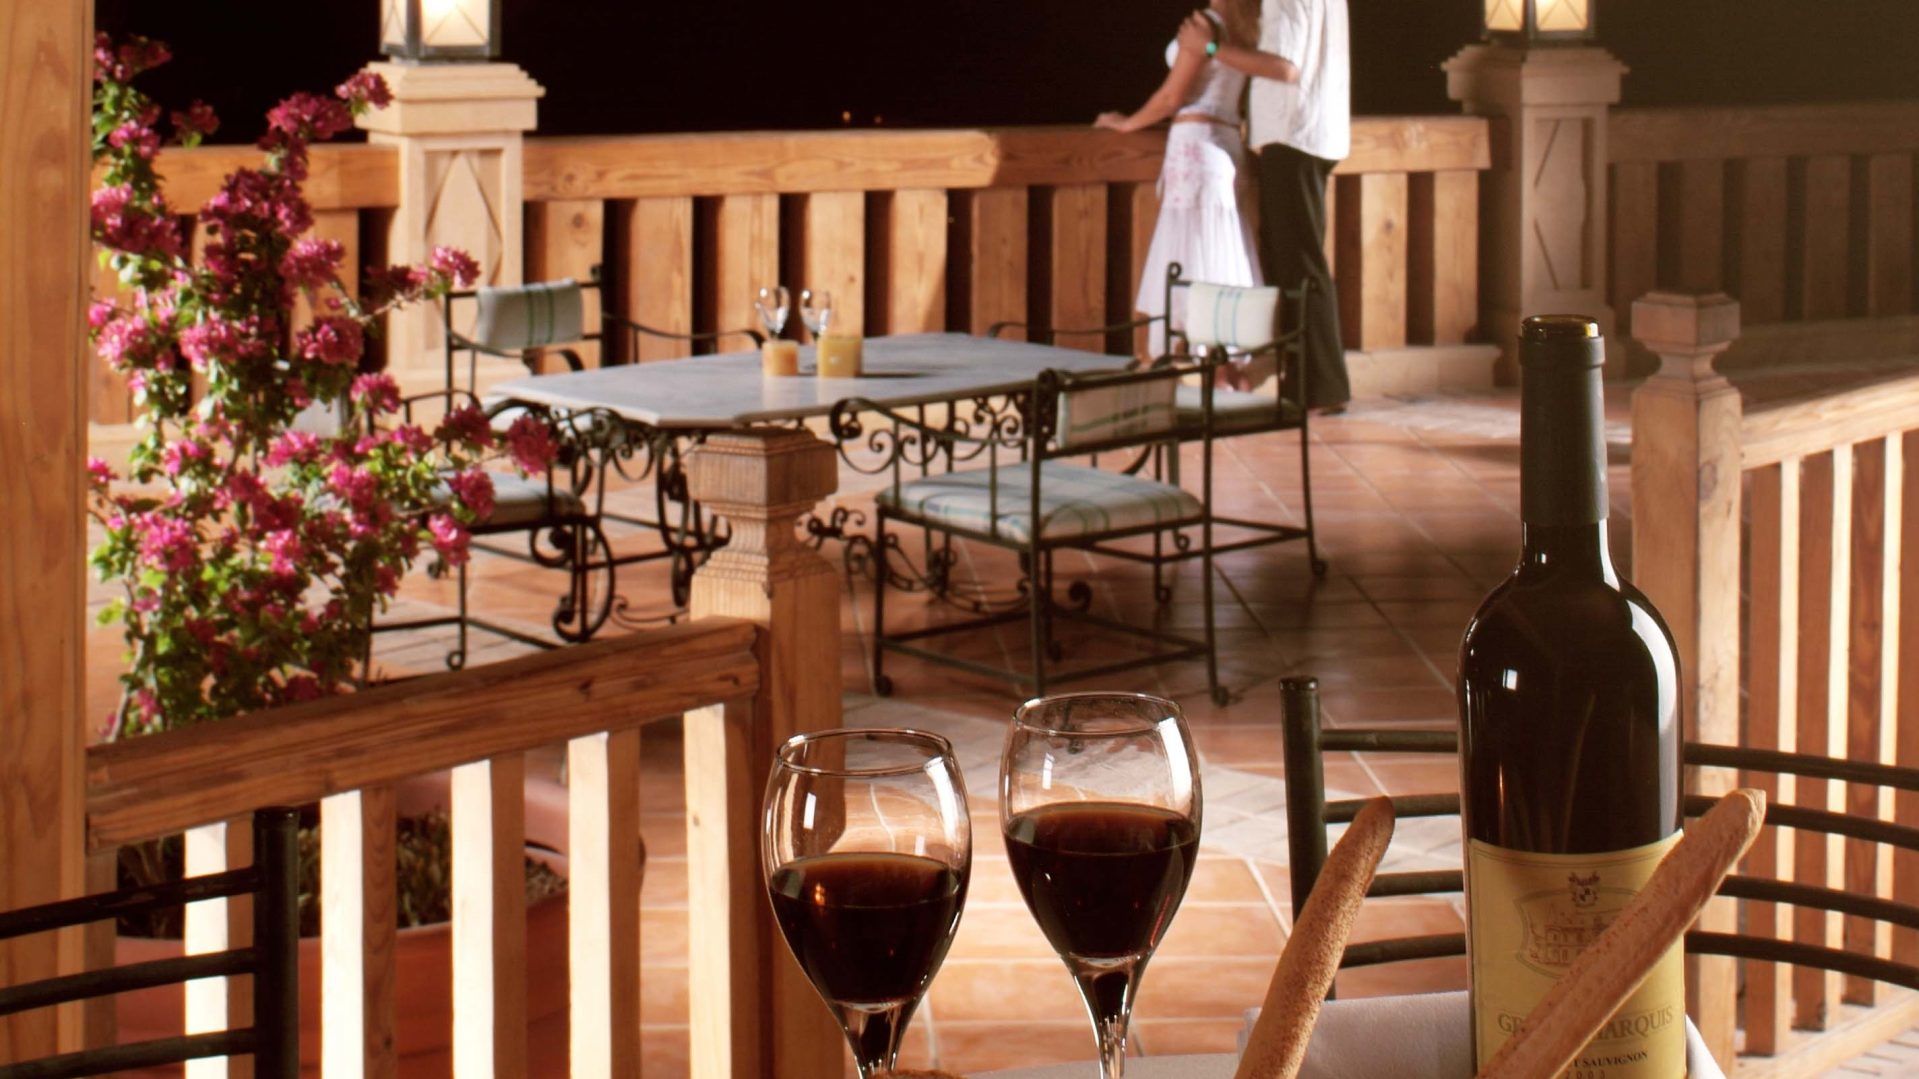 A Dining Table With A Glass Of Wine